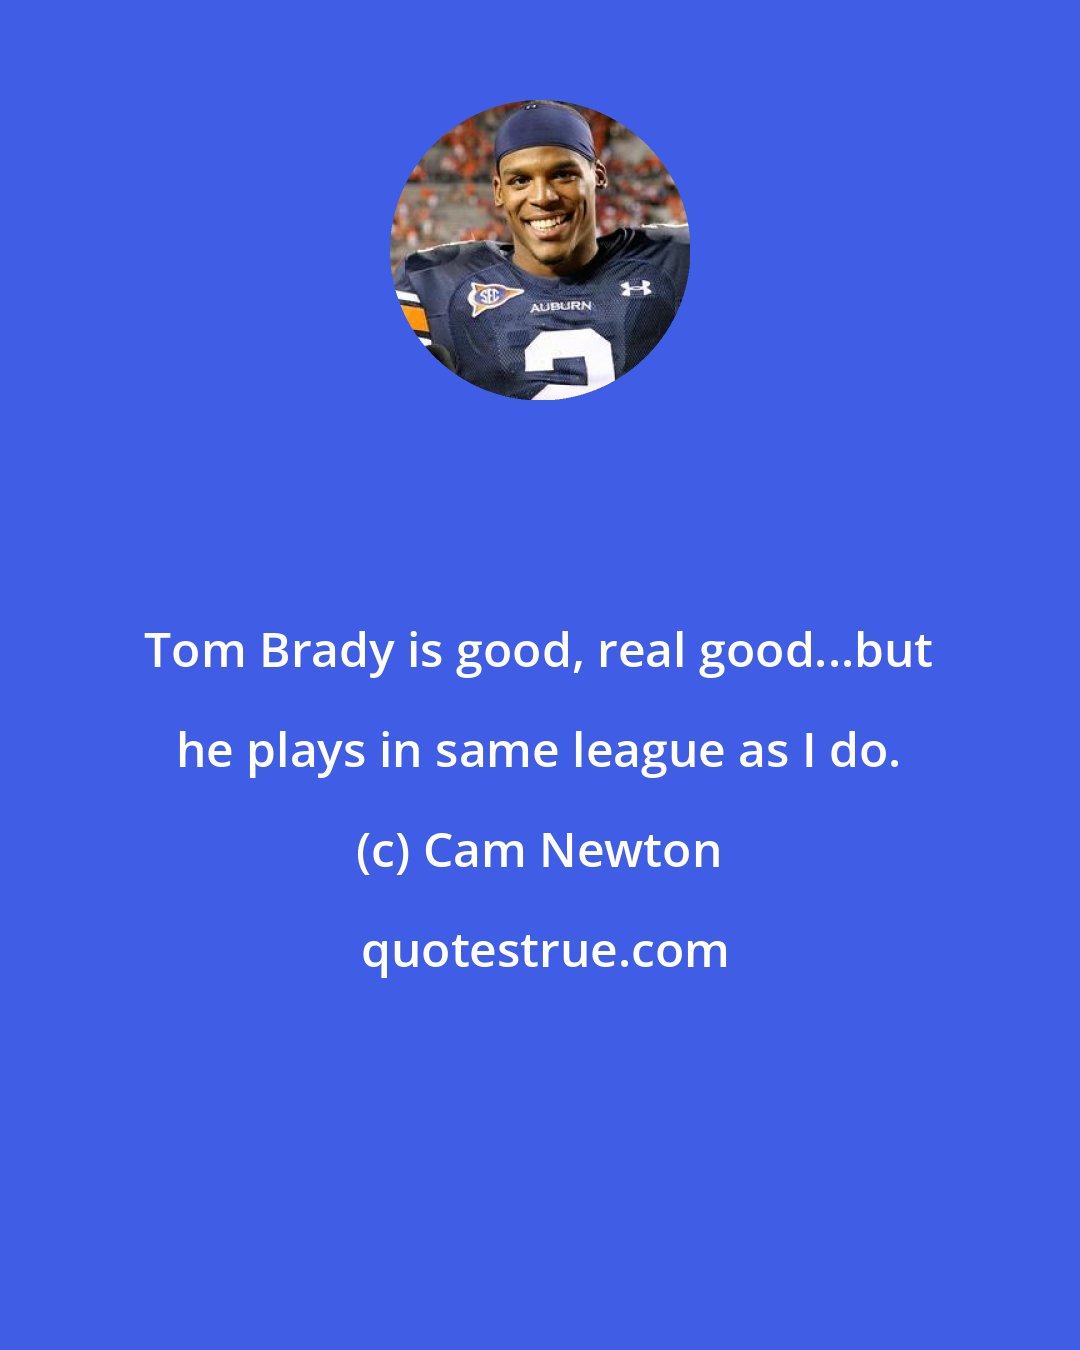 Cam Newton: Tom Brady is good, real good...but he plays in same league as I do.